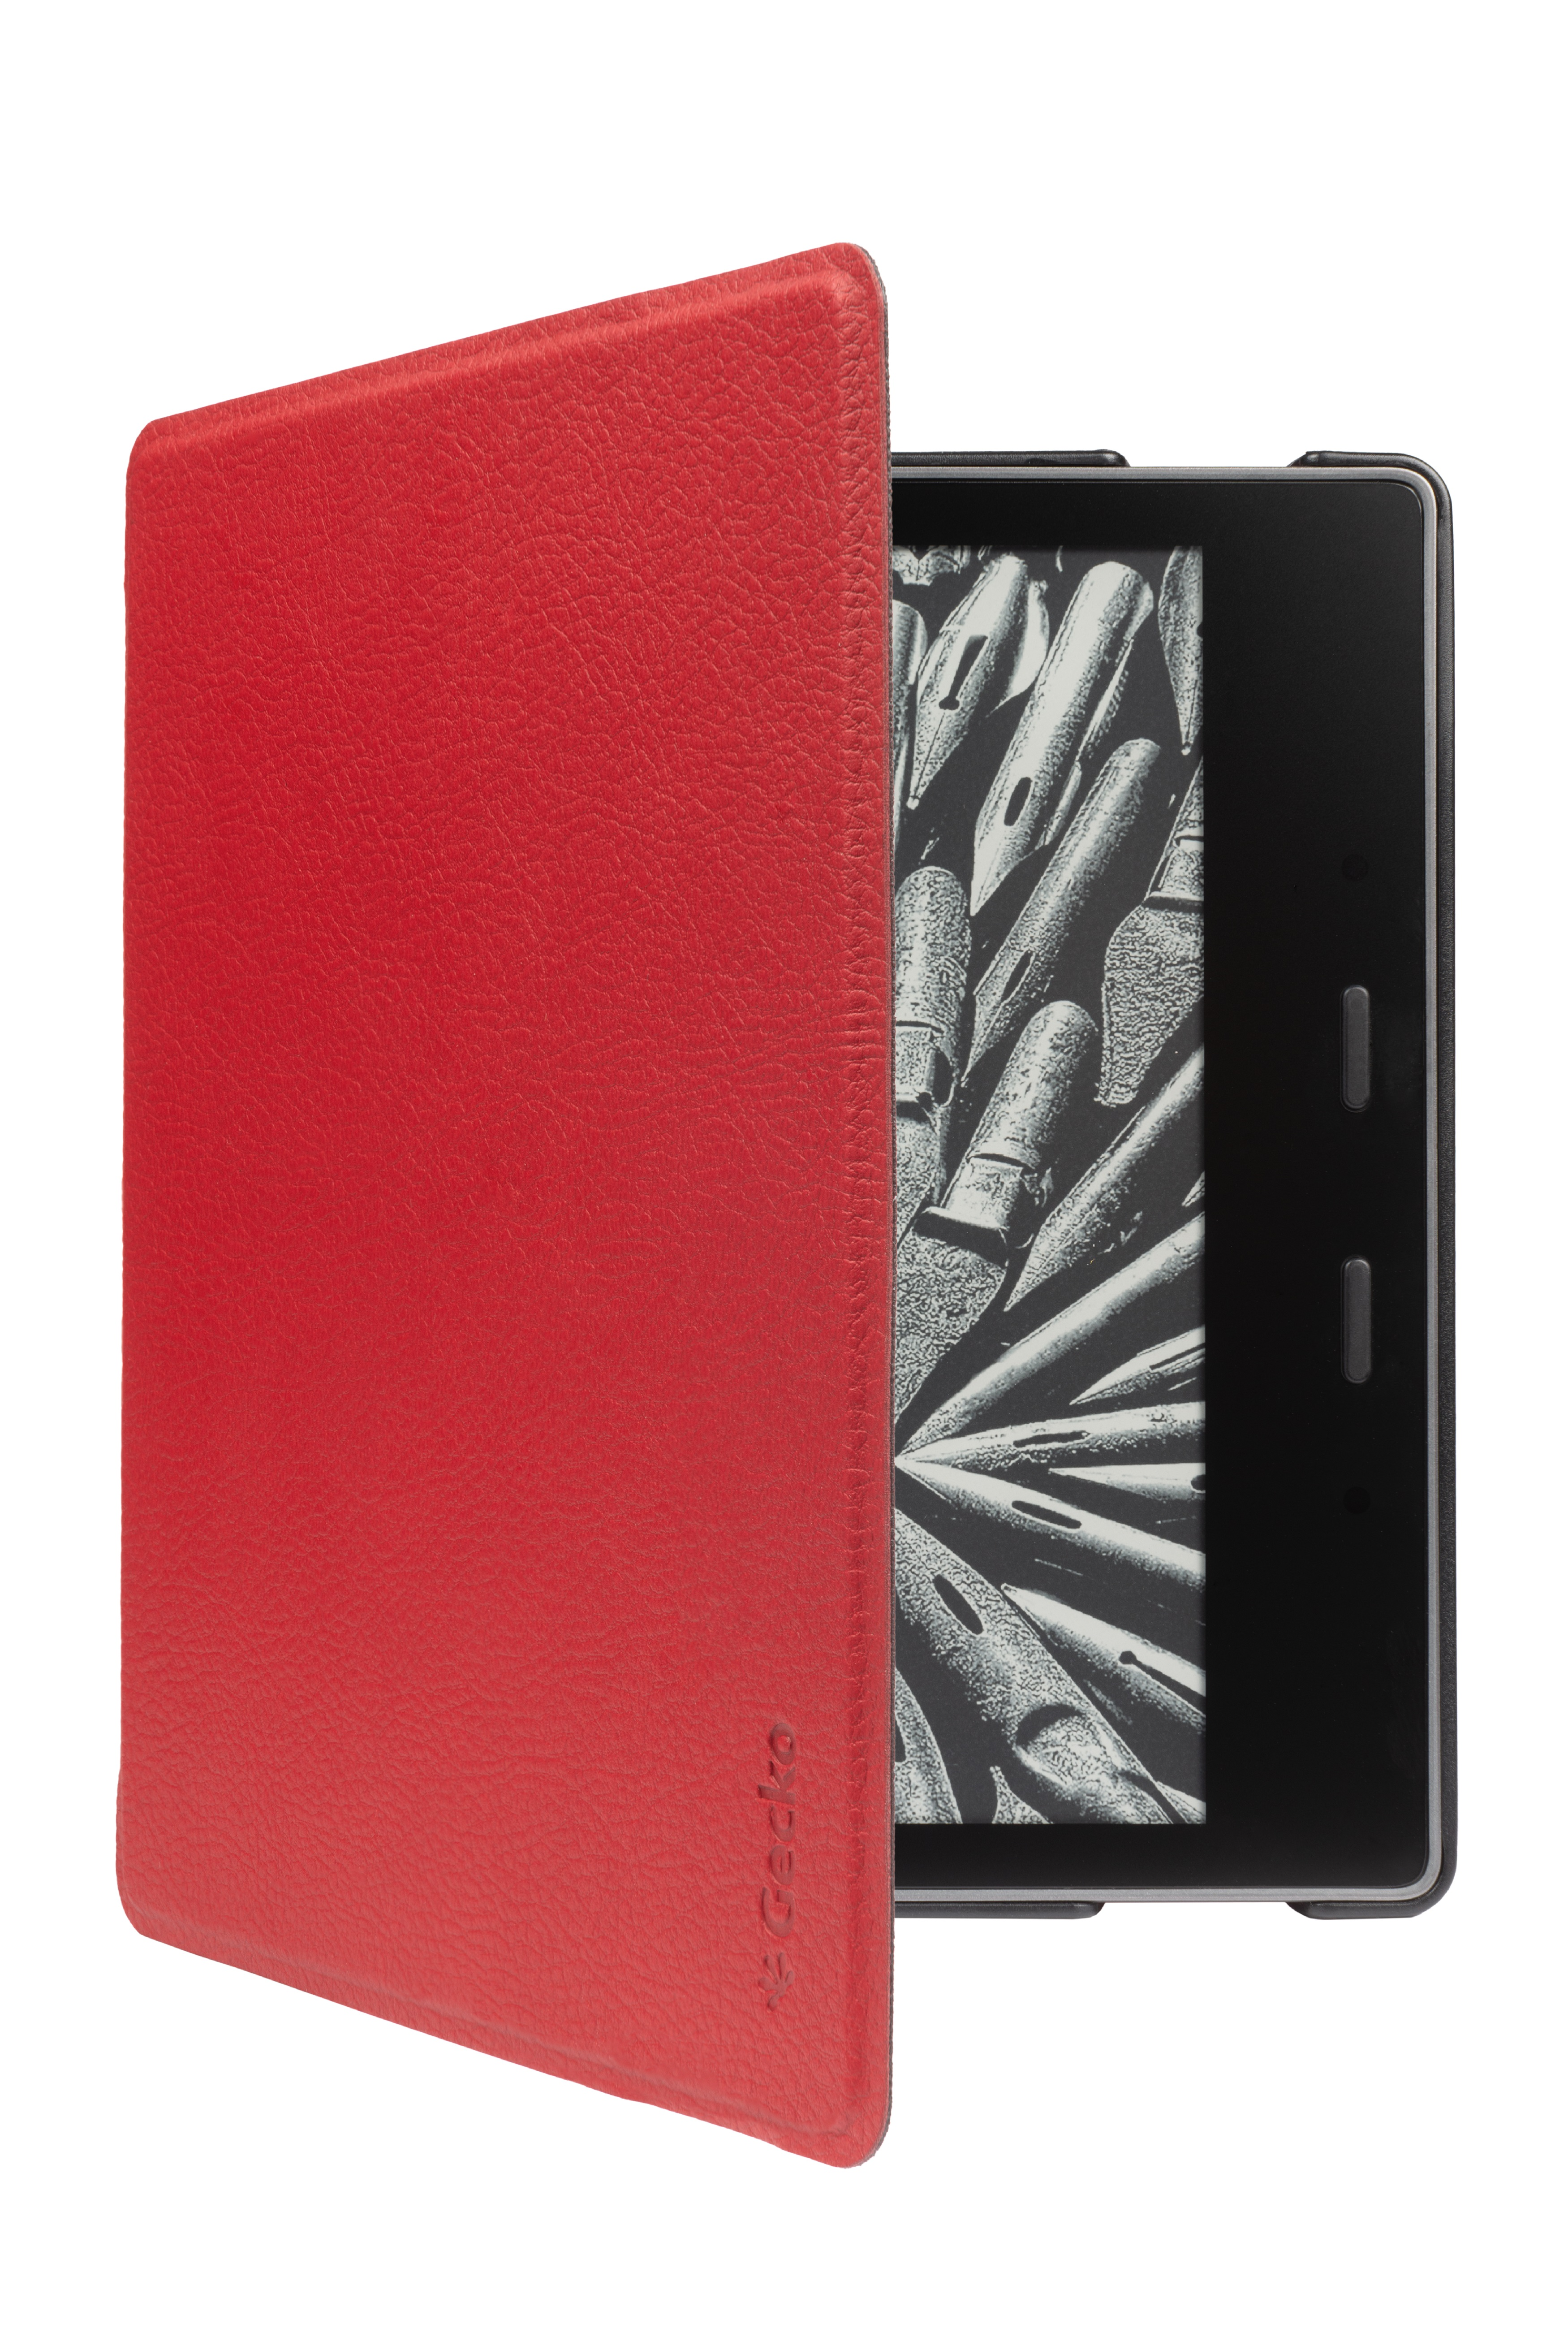 Bookcover Leather, Kindle Hülle E-Book Rot PU COVERS GECKO Reader Cover Amazon für Slimfit